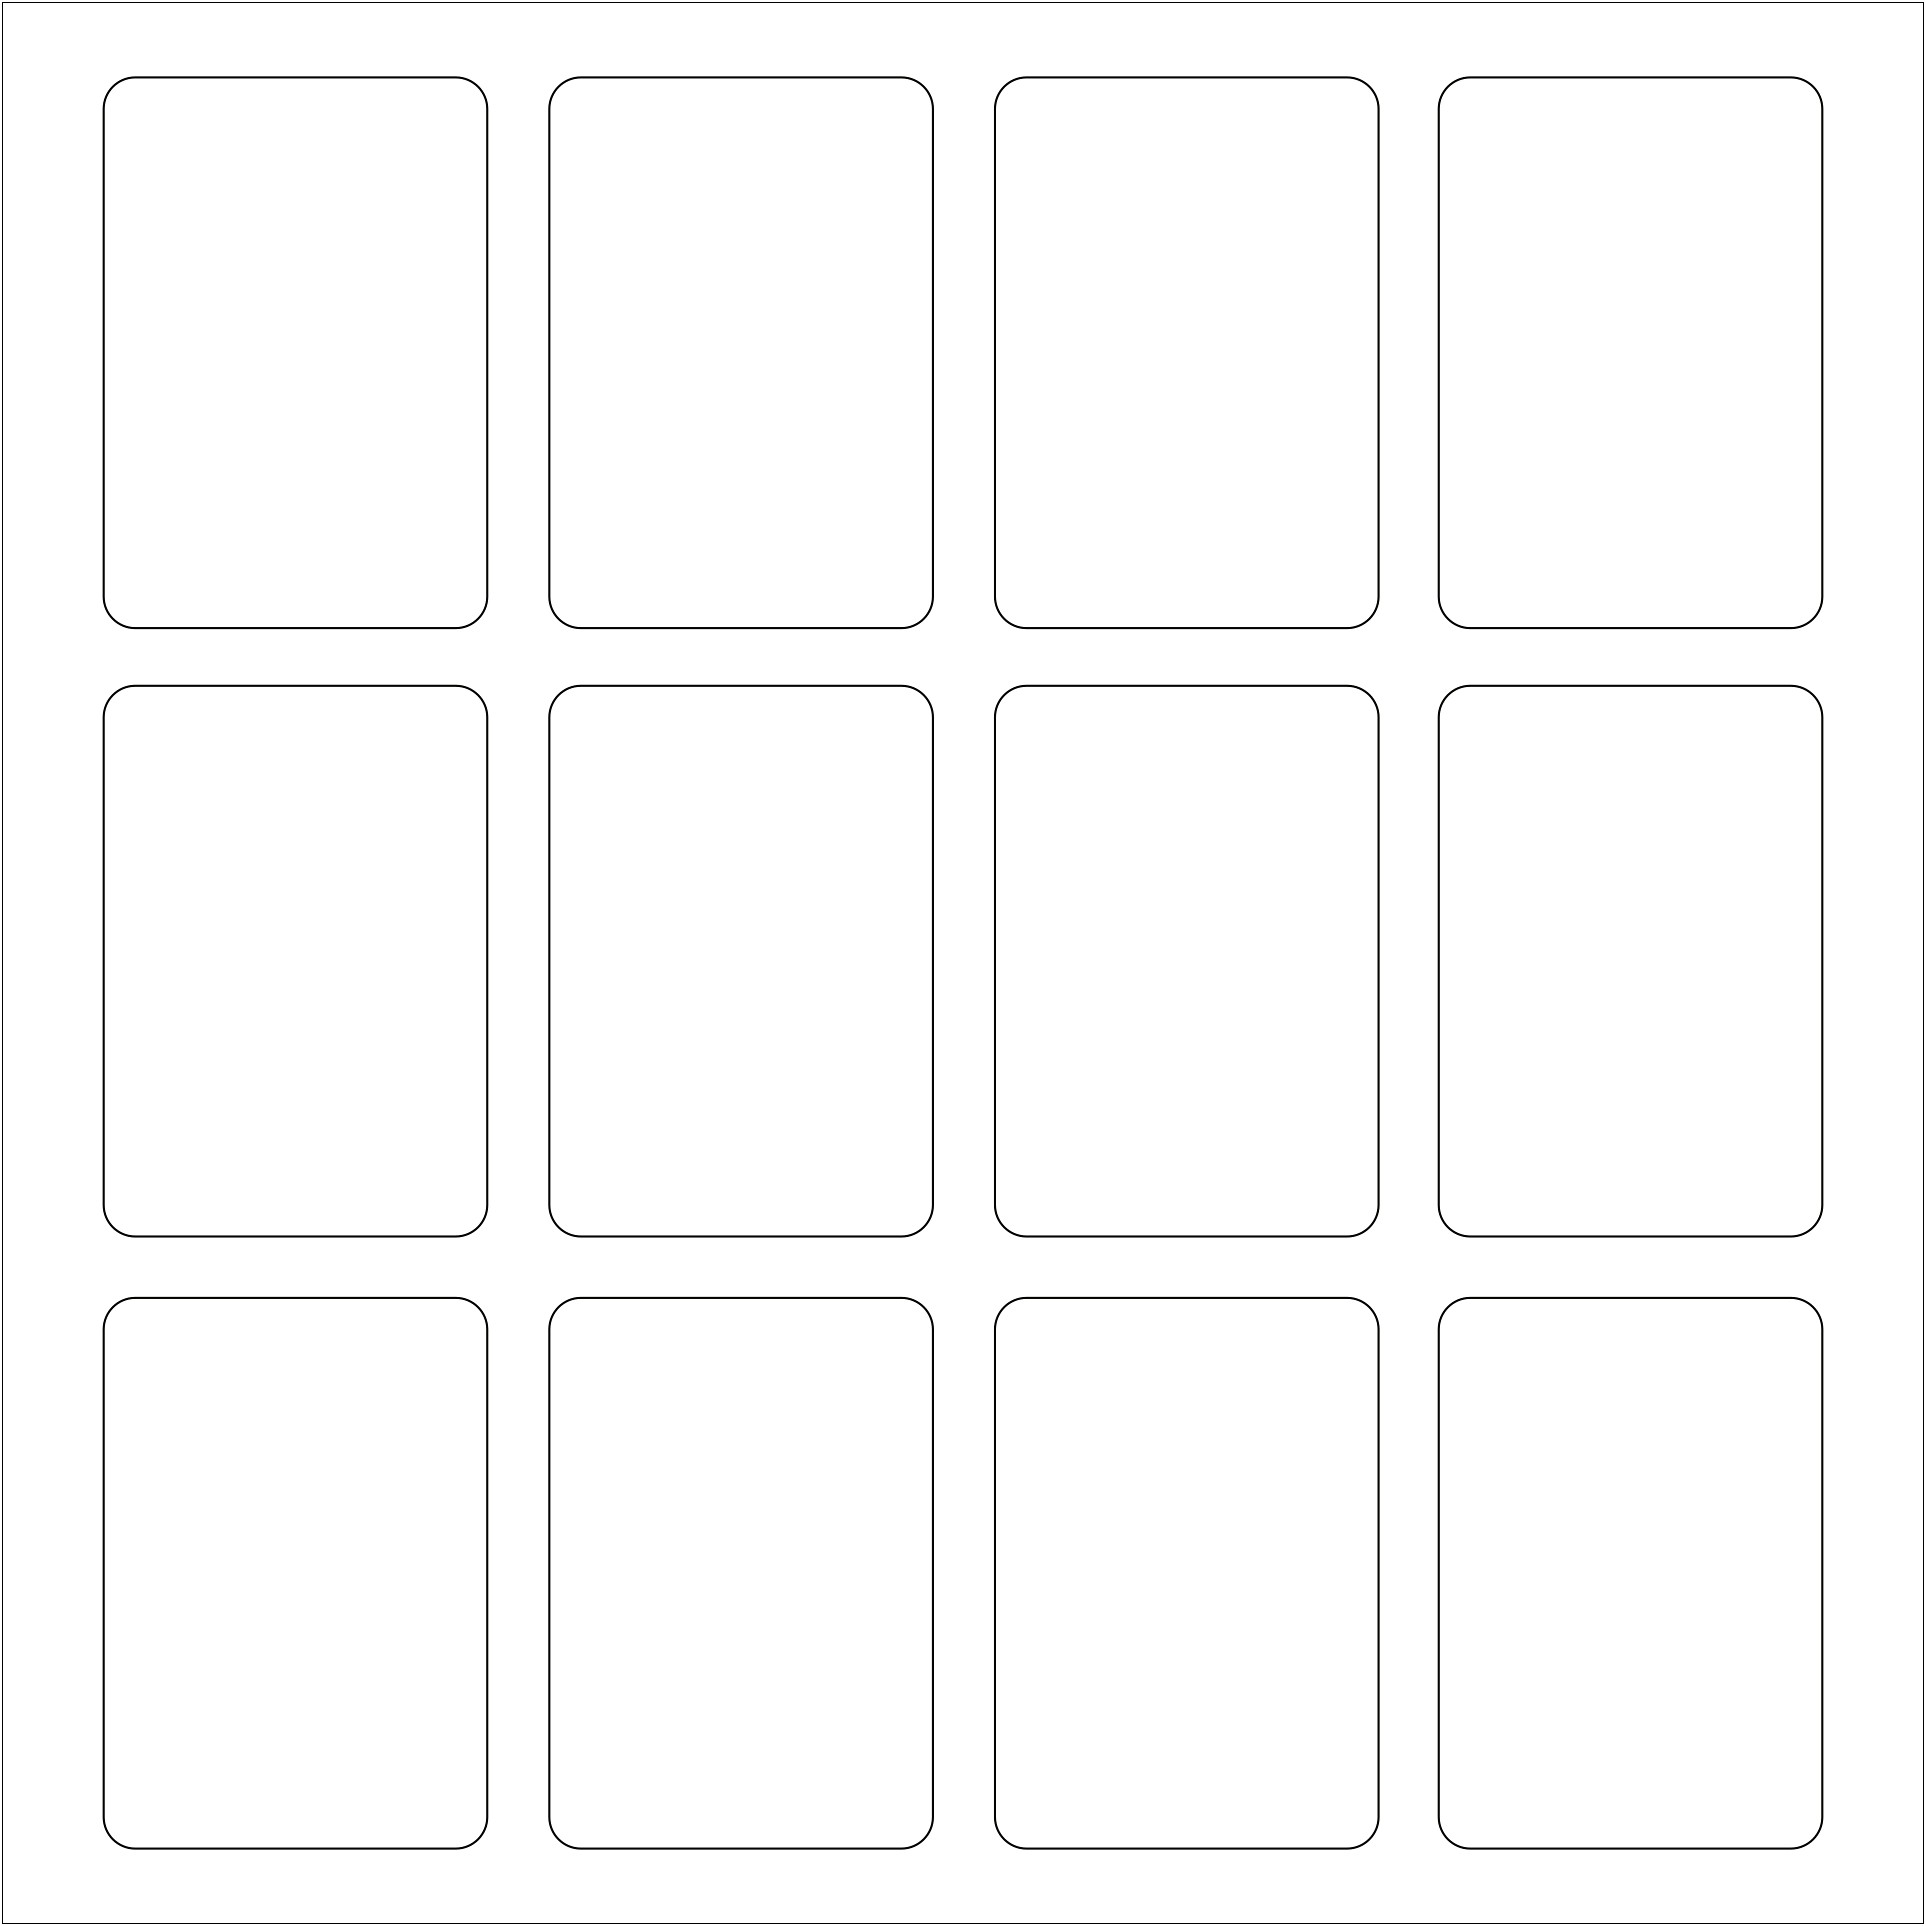 Ms Word Print Template For Custom Card Games